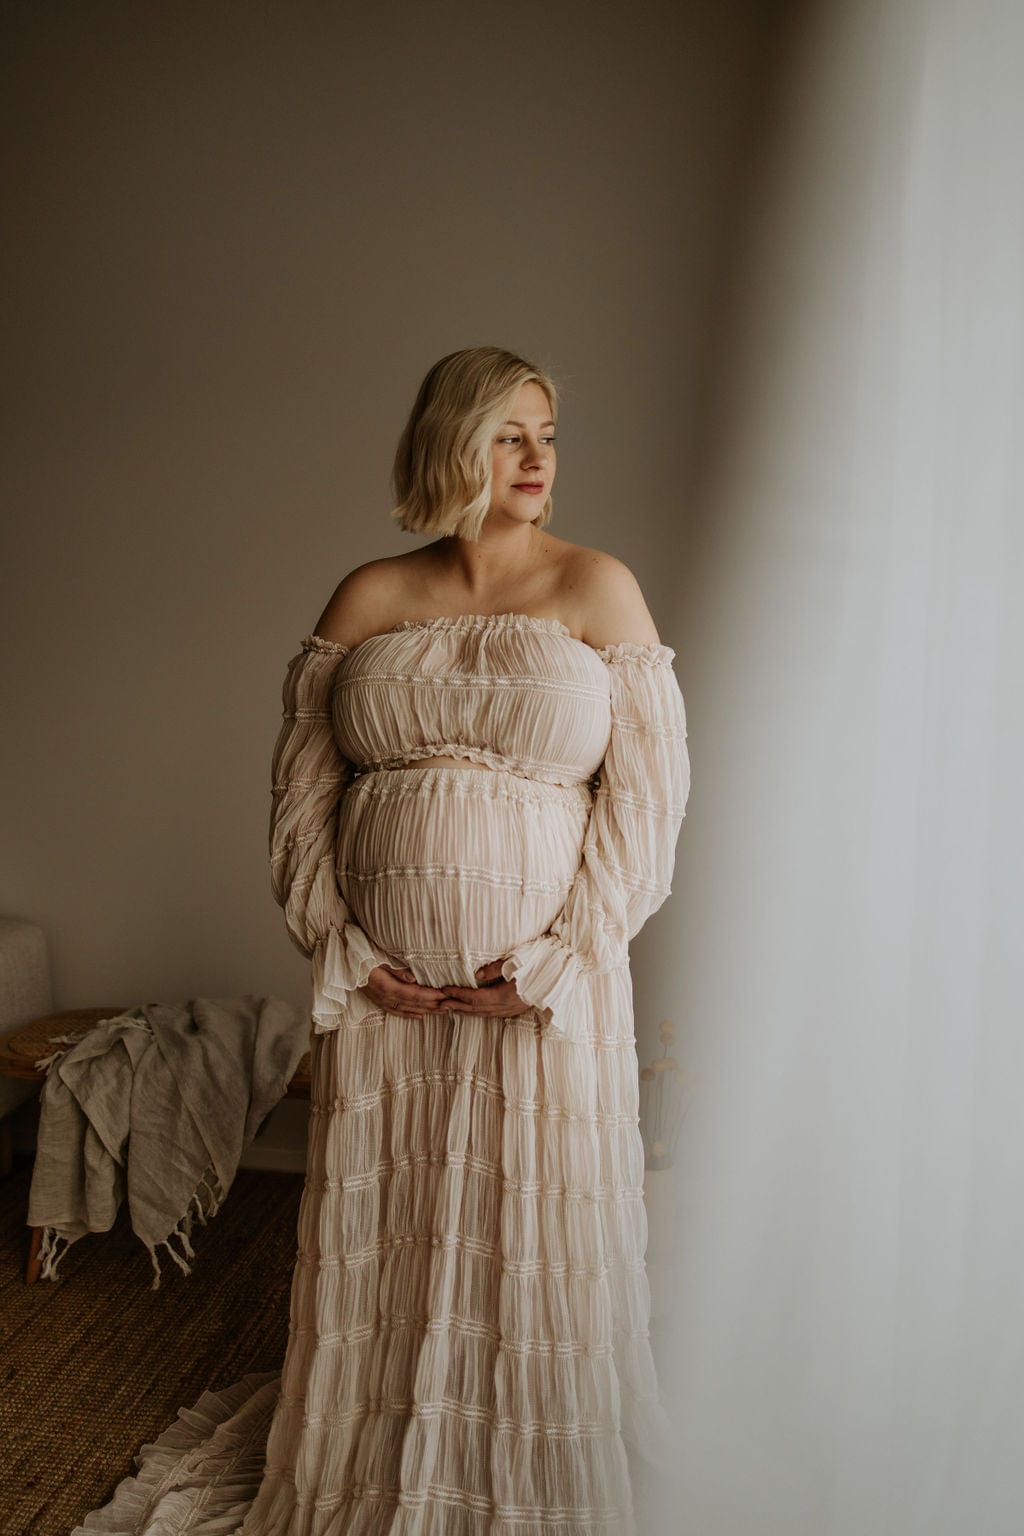 A pregnant lady wearing Everything Lace Hire Wonderful Moments Two Piece Photoshoot Set during her studio maternity photoshoot